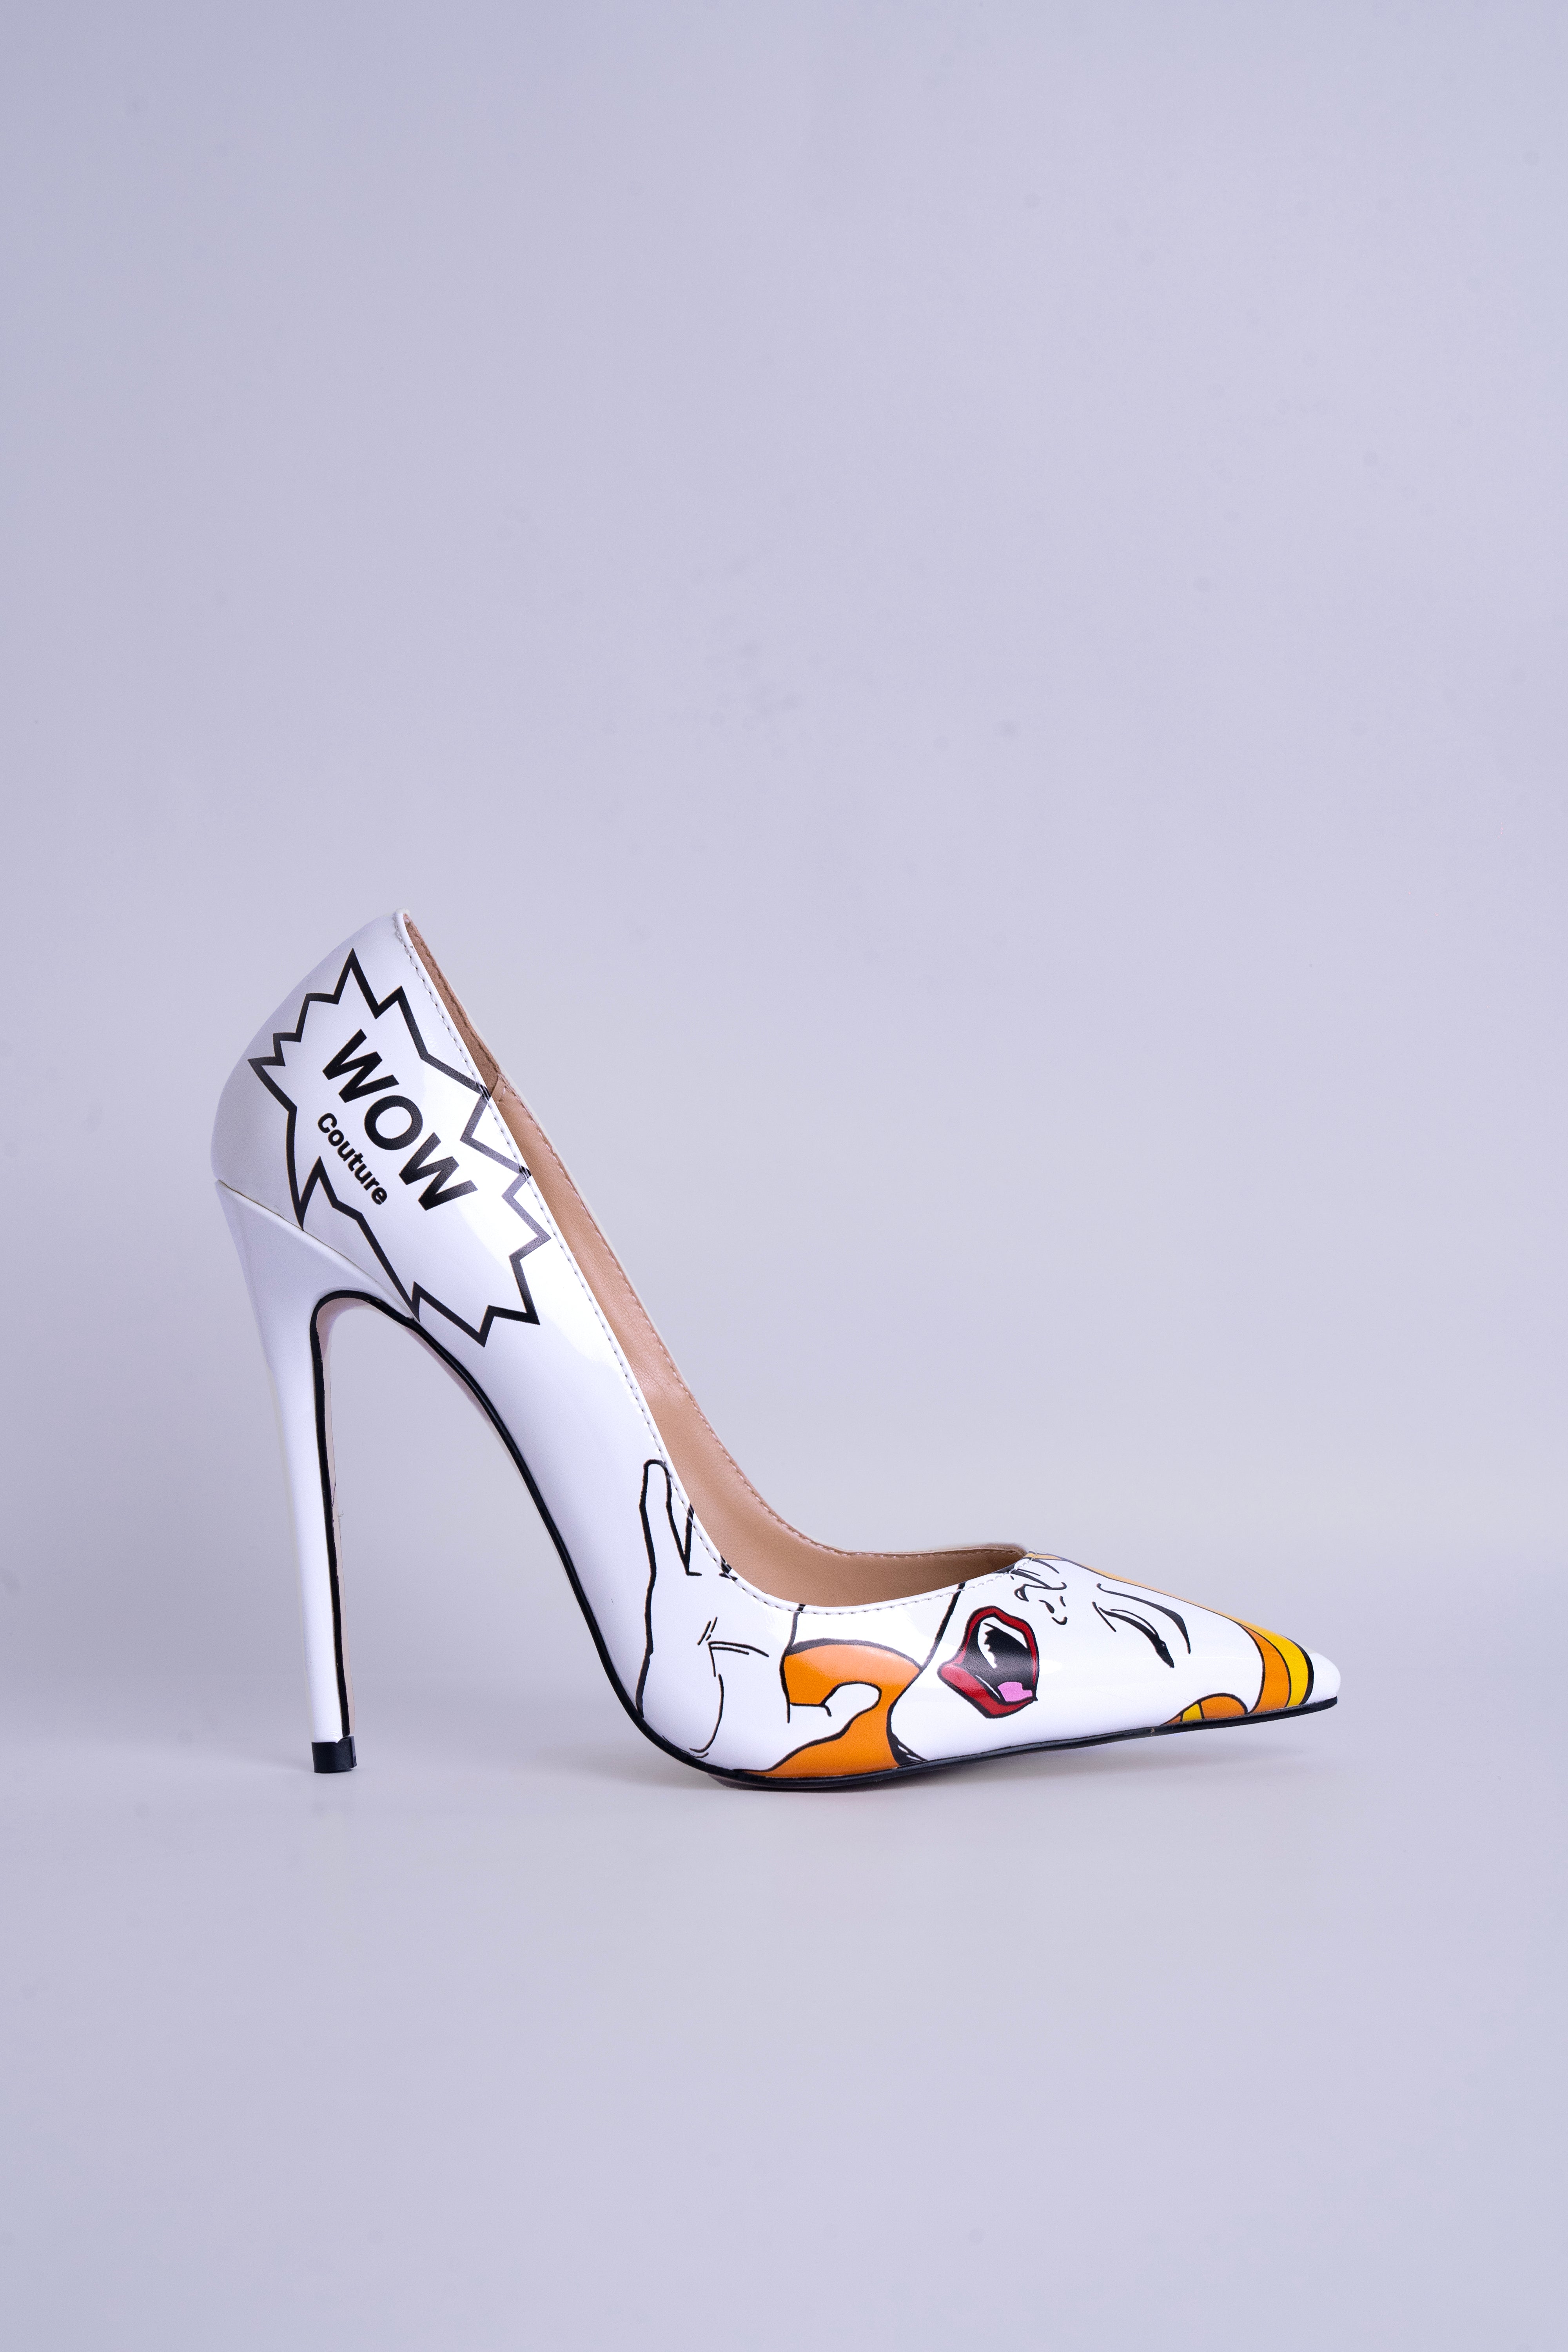 Shop Maroon Stain Tie-Up Pencil Heels by SOLE HOUSE at House of Designers –  HOUSE OF DESIGNERS